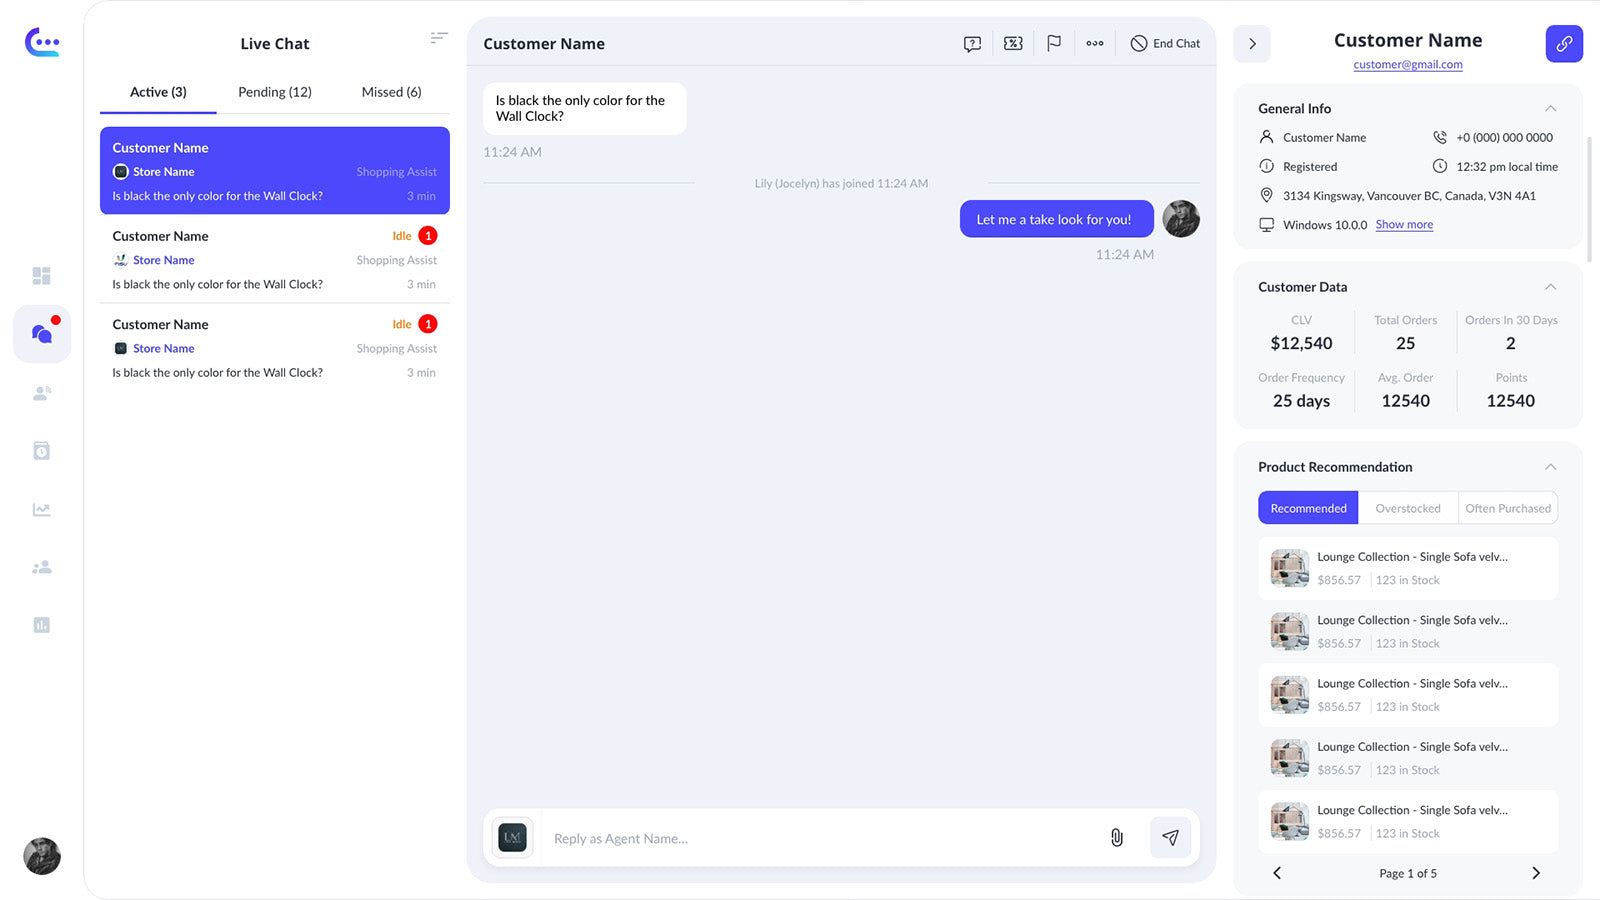 Support customer via chat features